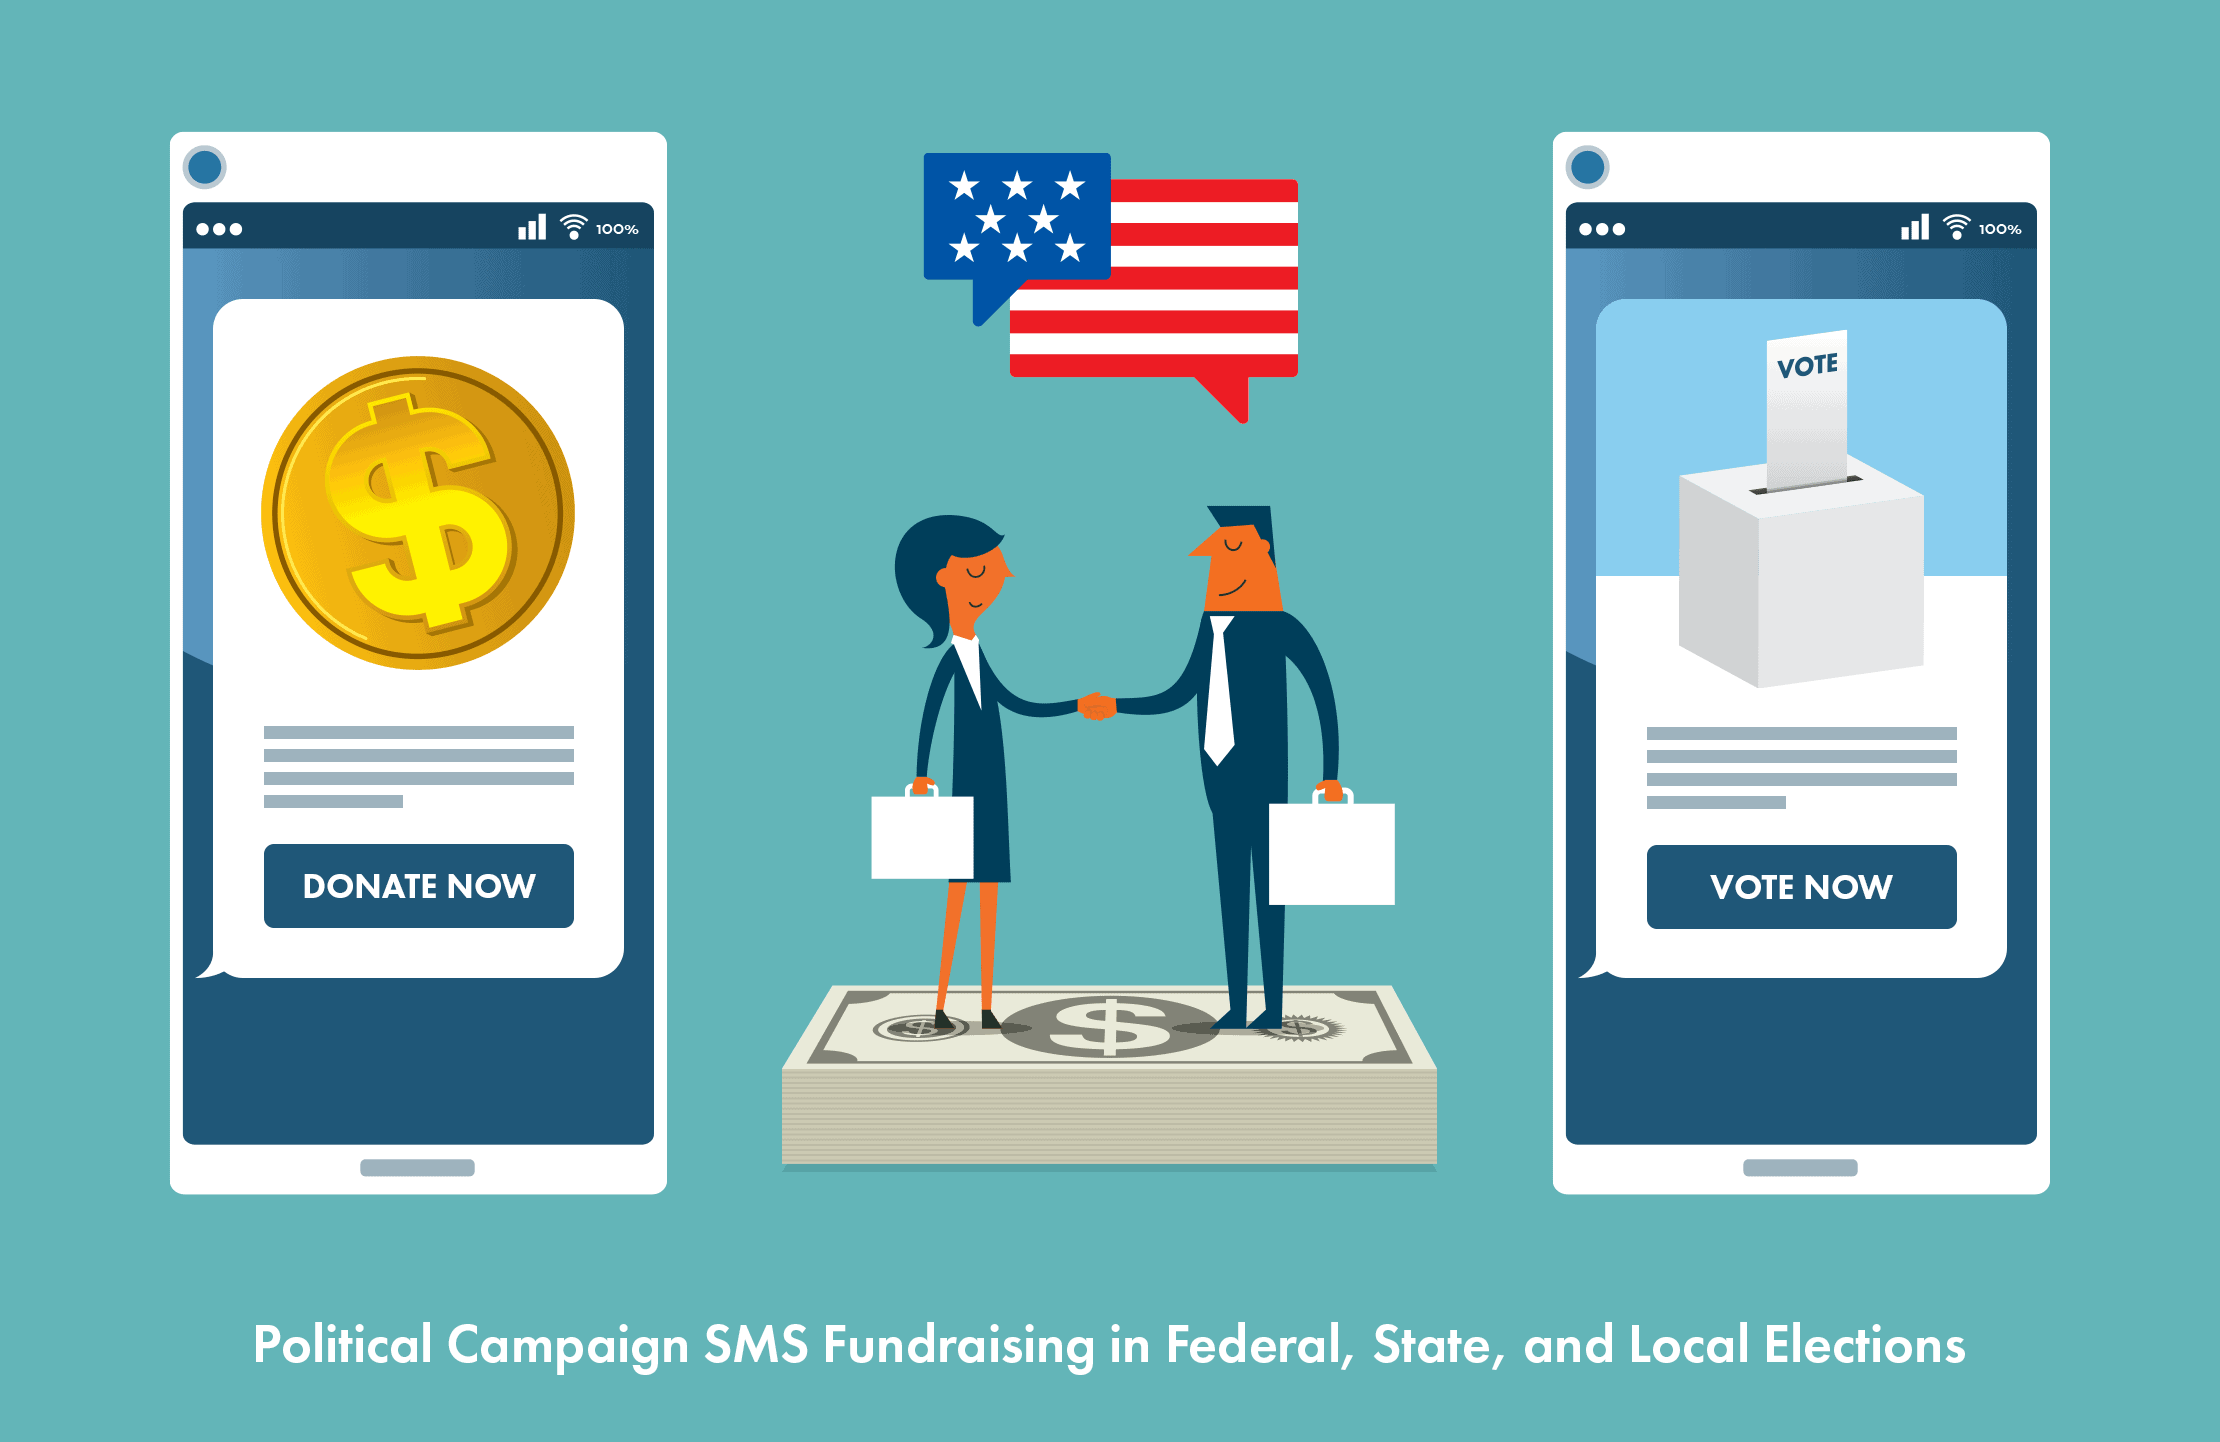 Political Campaign SMS Fundraising in Federal, State, and Local Elections